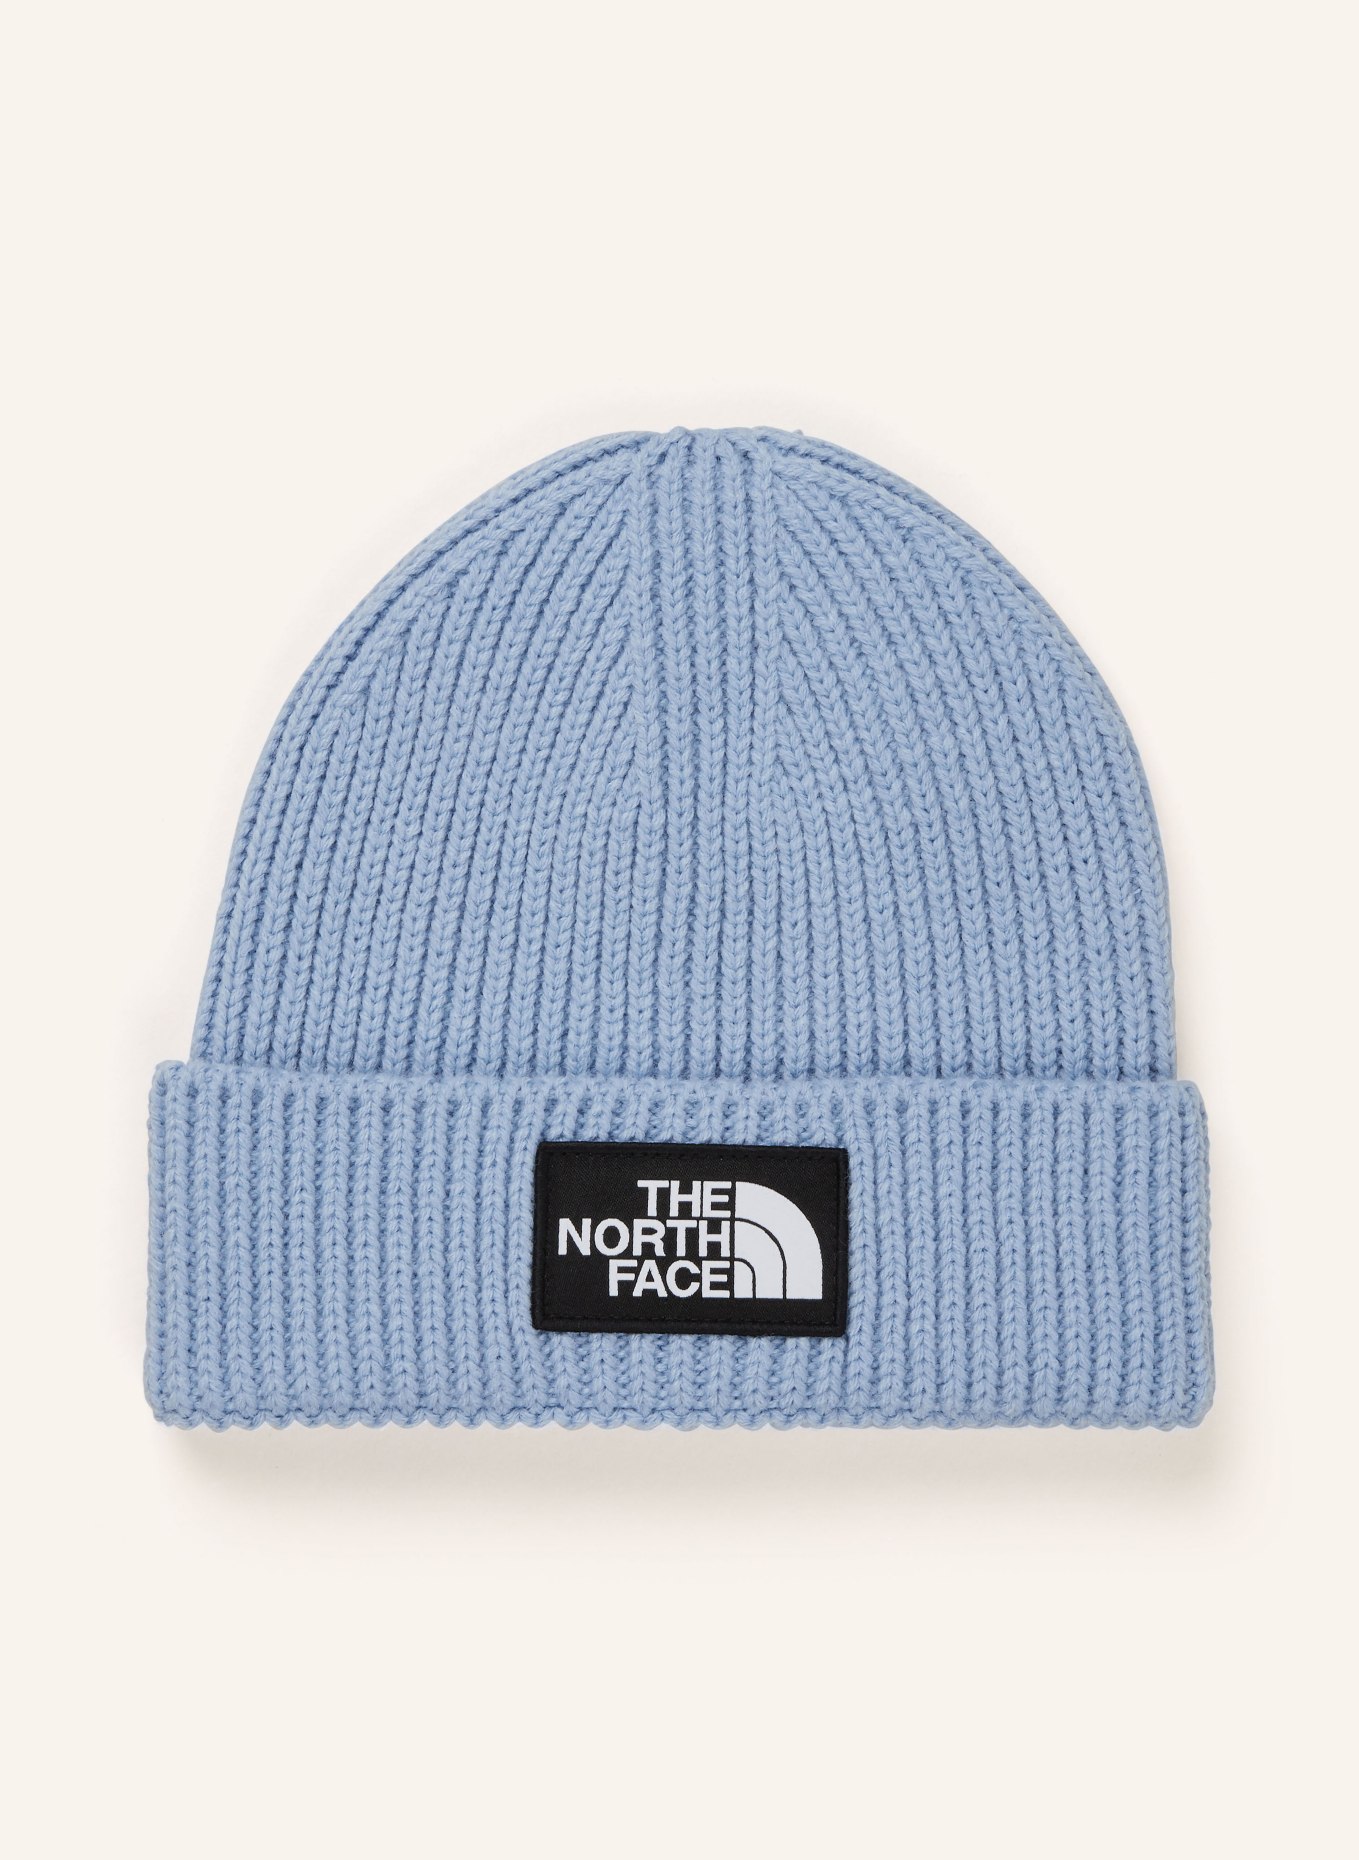 THE NORTH FACE Beanie, Color: LIGHT BLUE (Image 1)